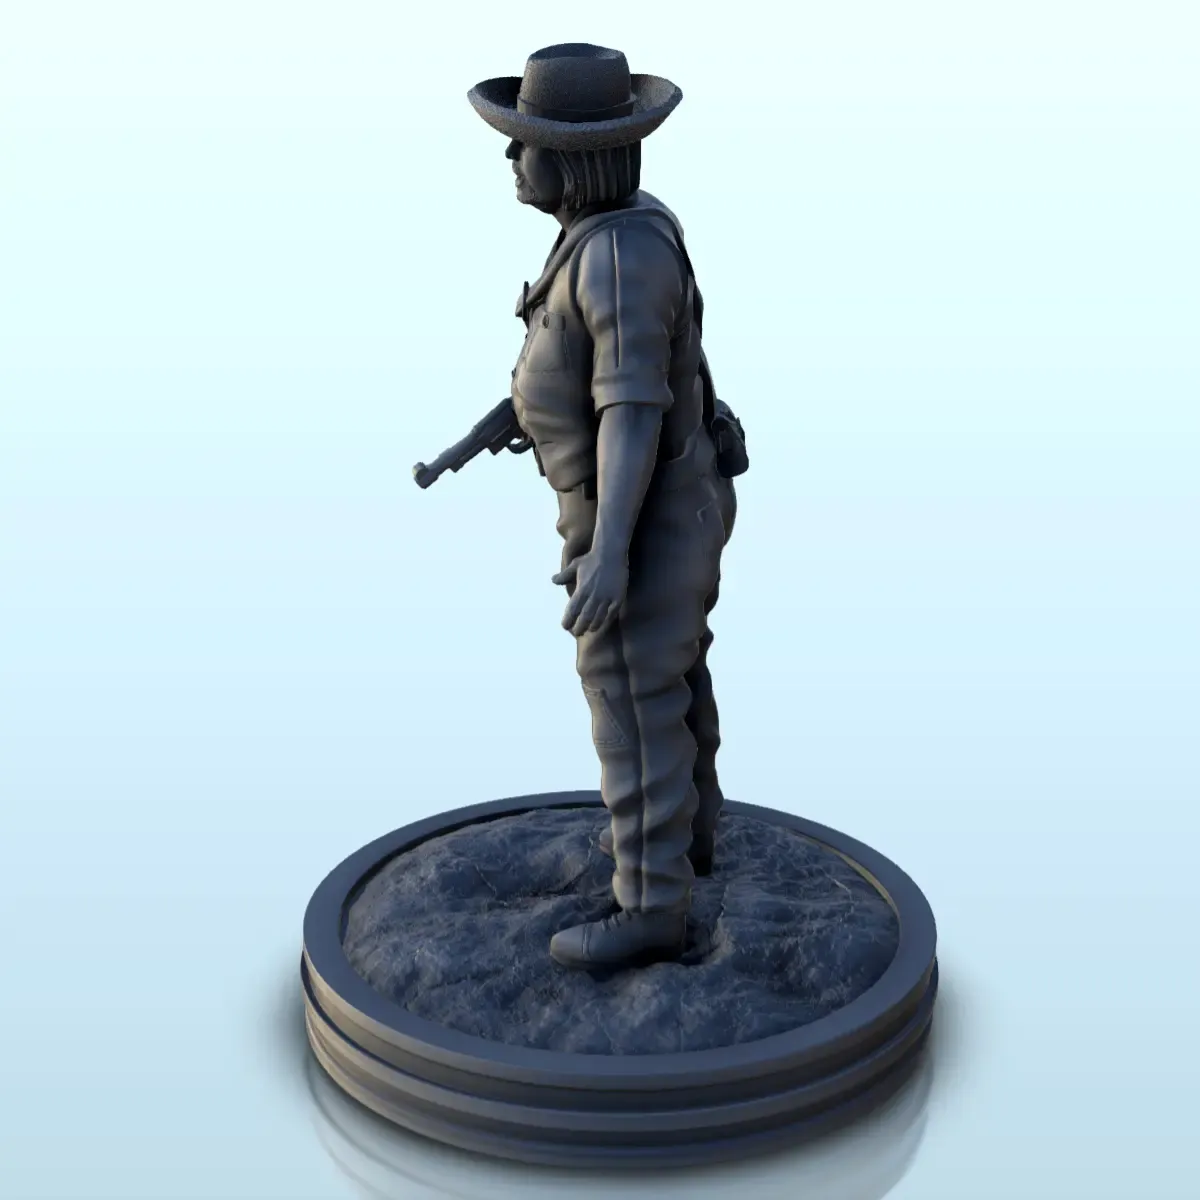 Bandit with hat and revolver (6) - Old West Figure miniature